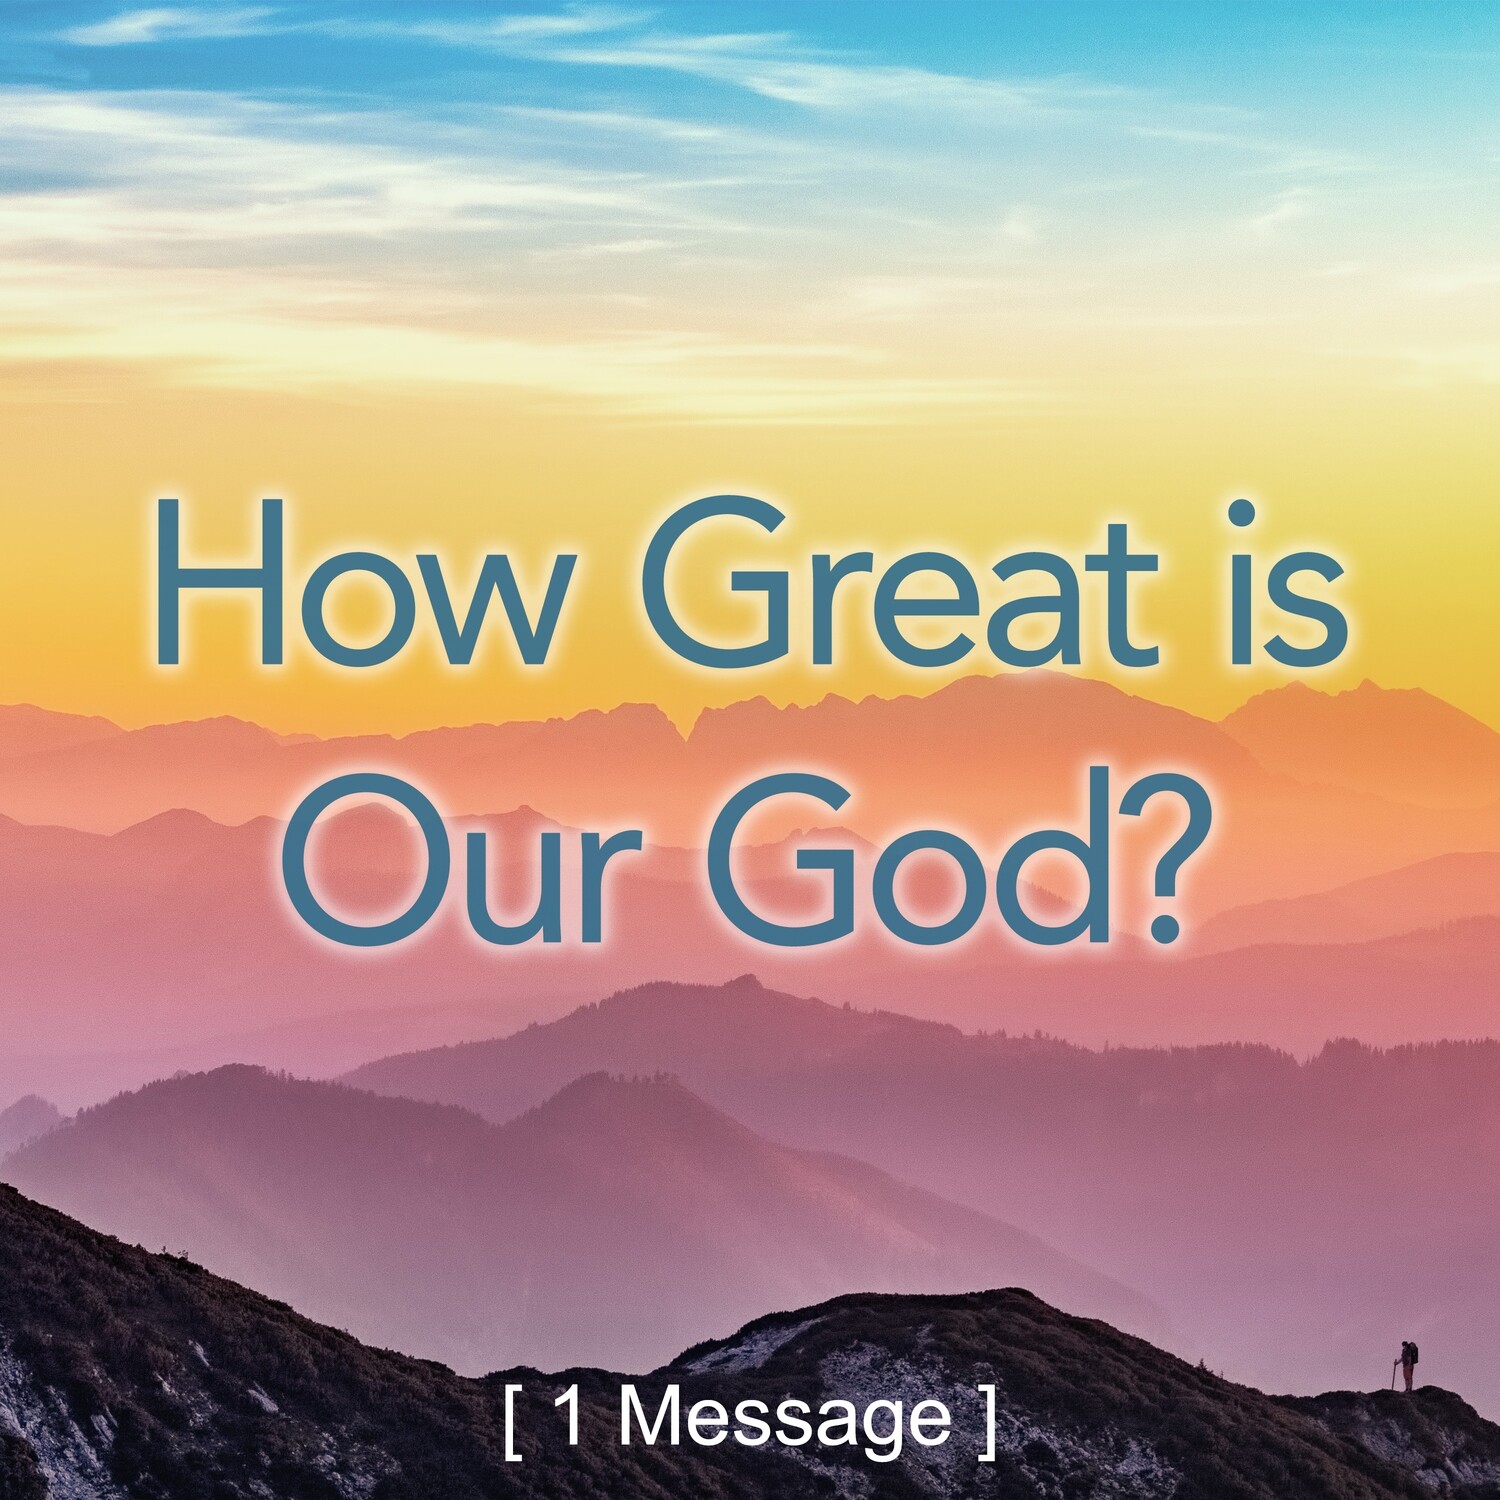 How Great is Our God?